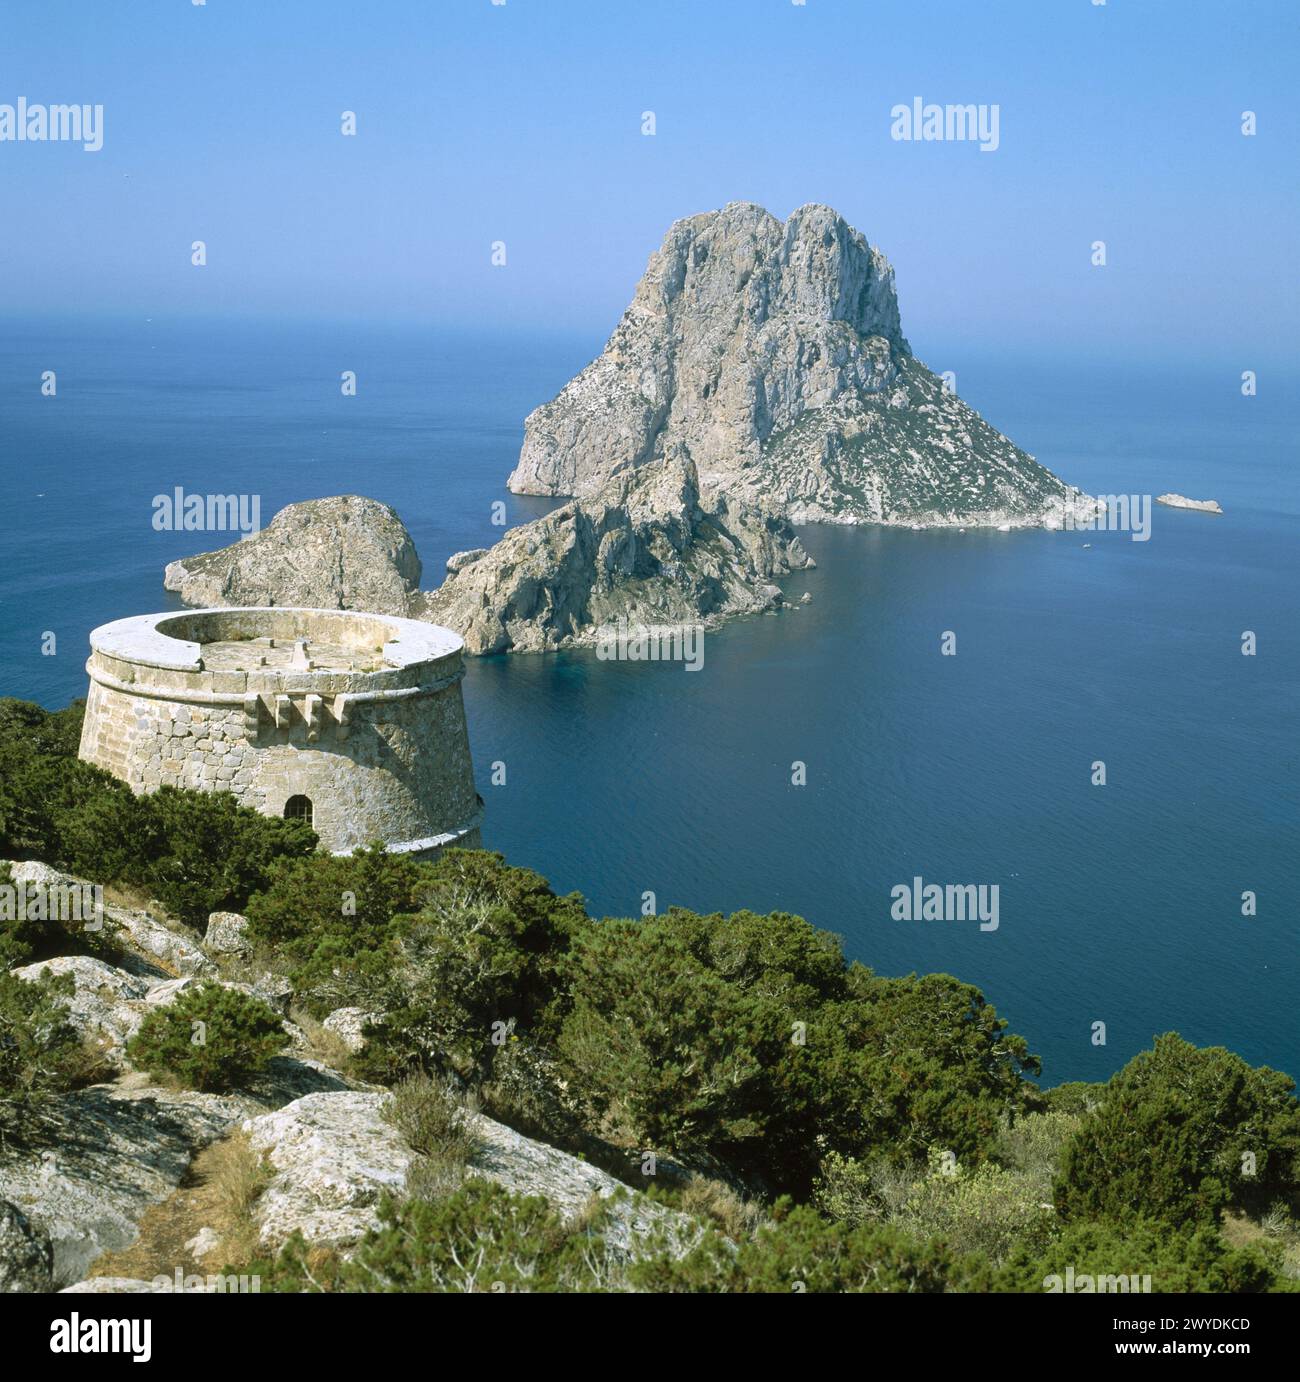 Torre des Savinar and Es Vedrà and Es Vedranell islands. Ibiza, Balearic Islands. Spain. Stock Photo